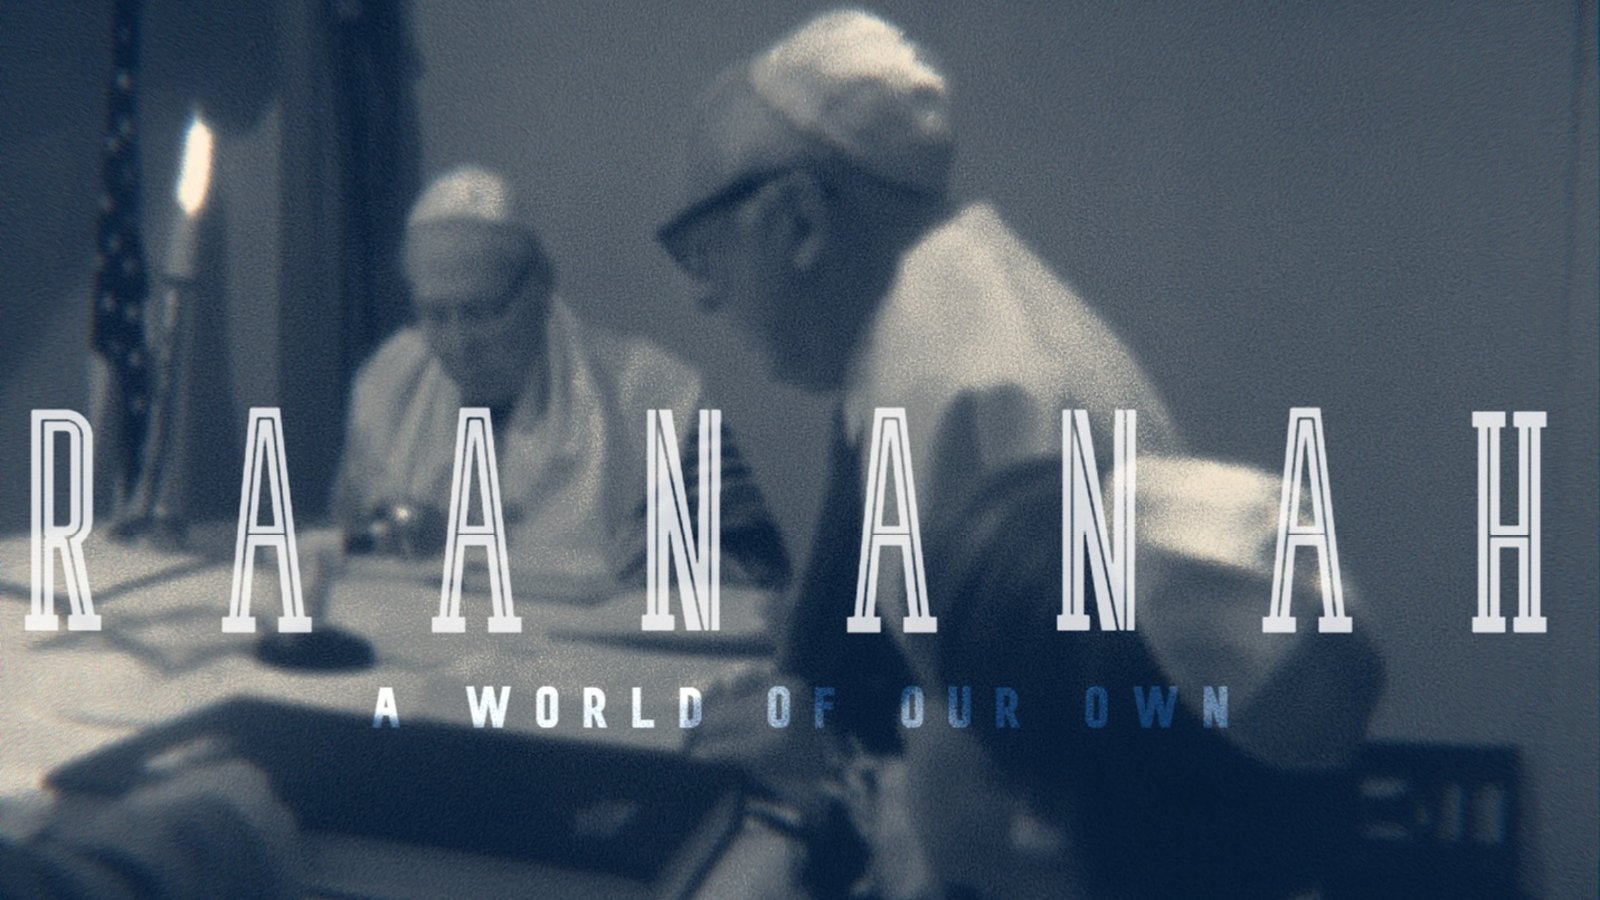 Raananah: A World of Our Own